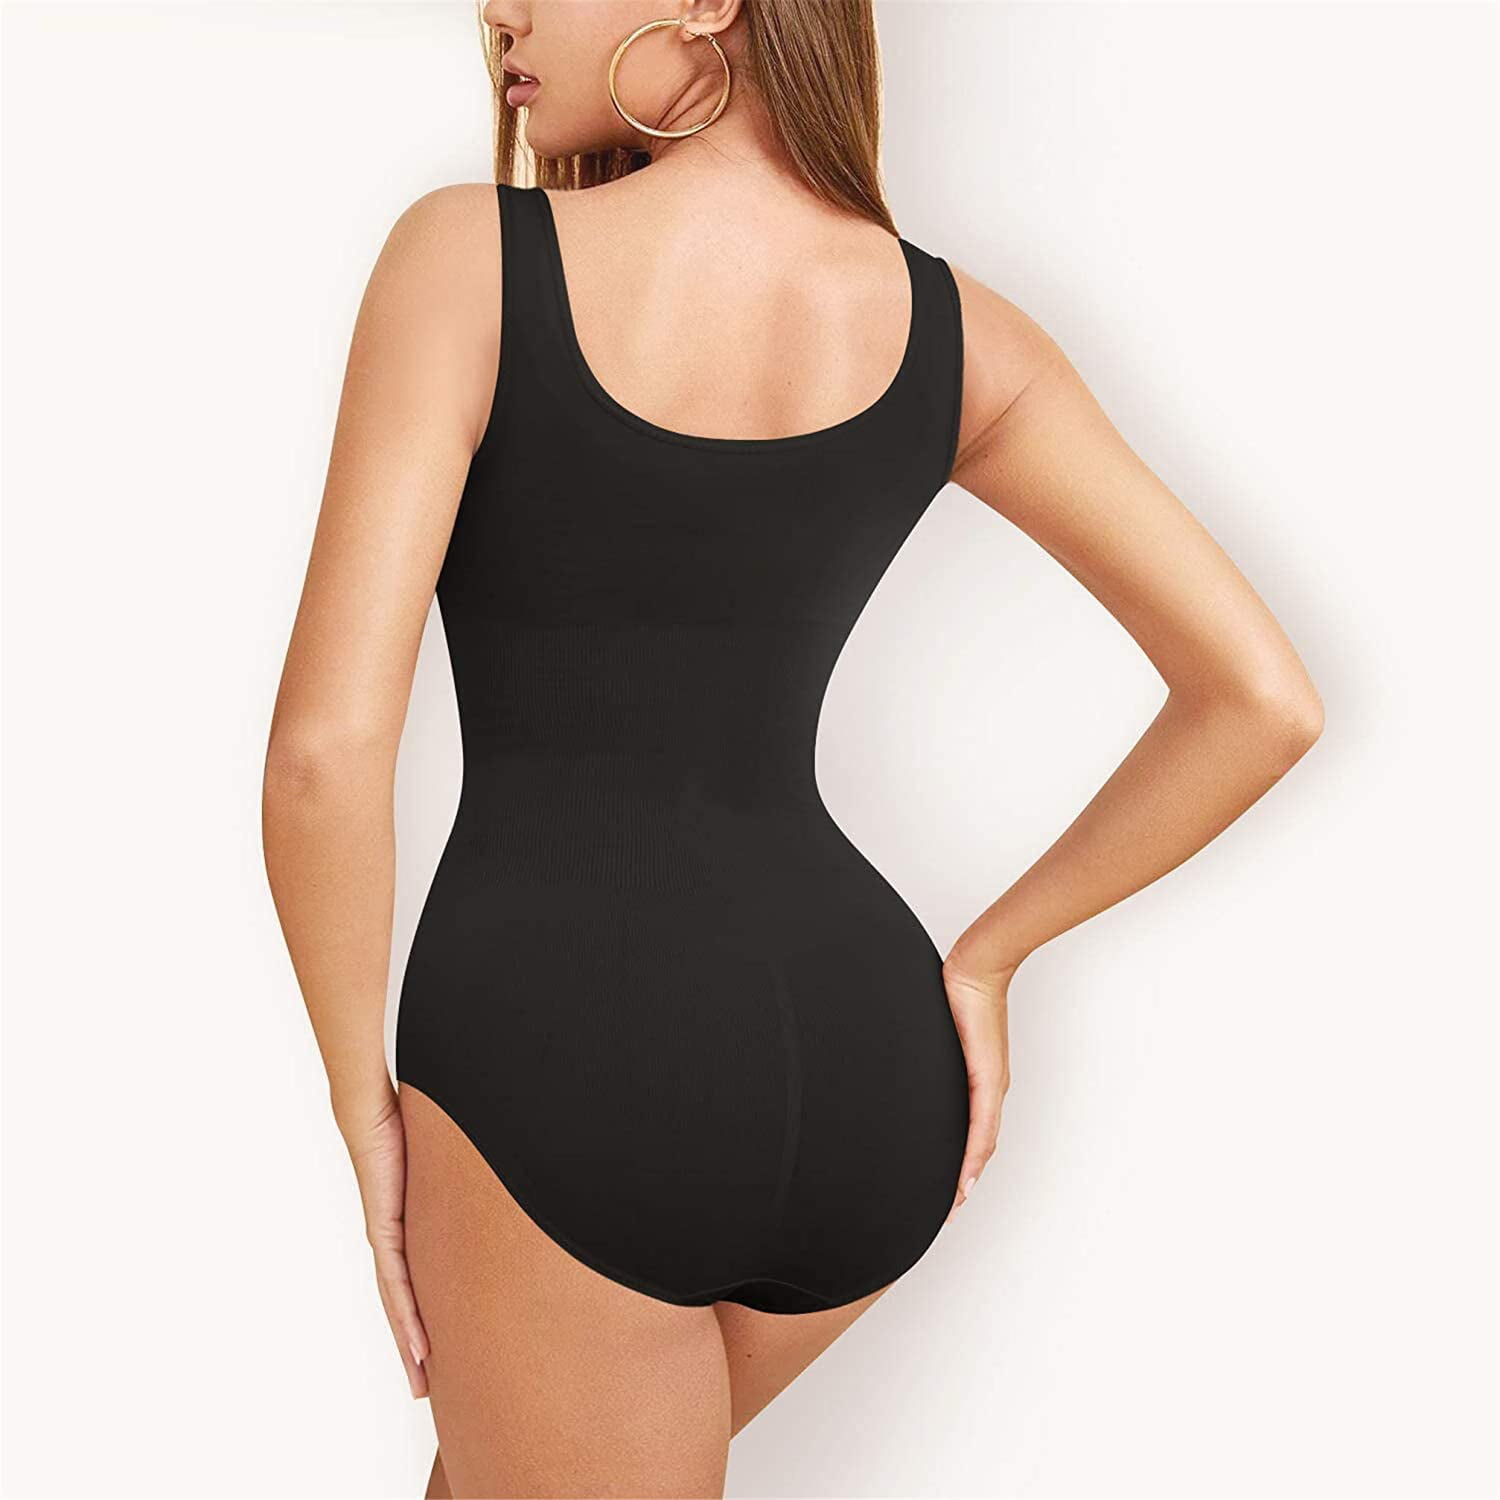 ER Womens Body Shaper Waist Trainer Irisnaya Women Slimming Bodysuits  Bodysuit Vest With Tummy Control And Sexy Lingerie From Huiguorou, $9.7